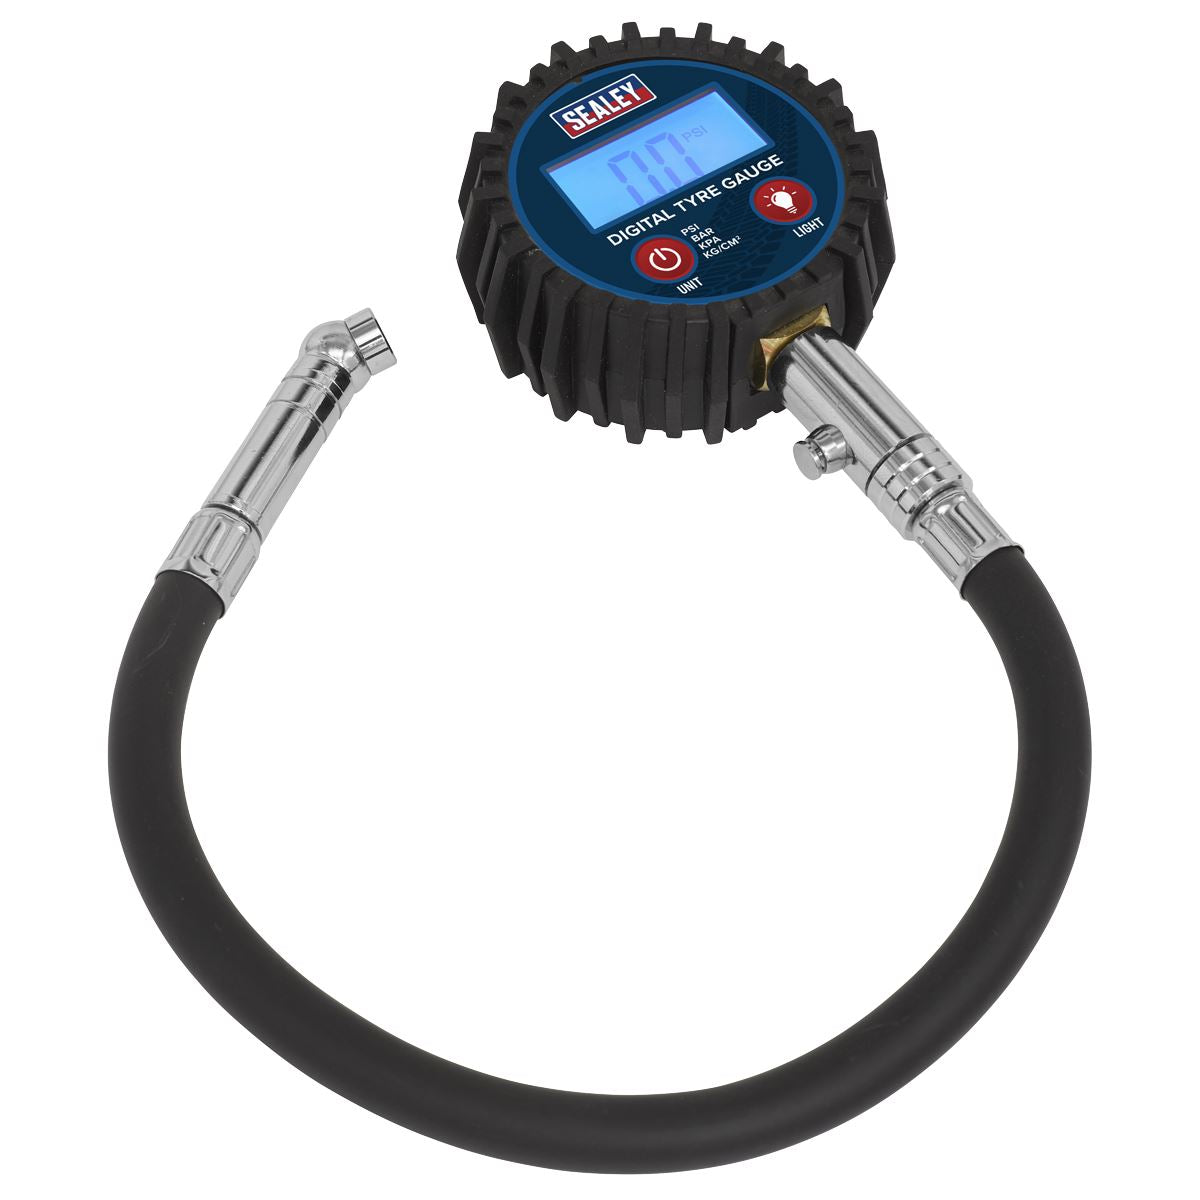 Sealey Digital Tyre Pressure Gauge with Push-On Connector